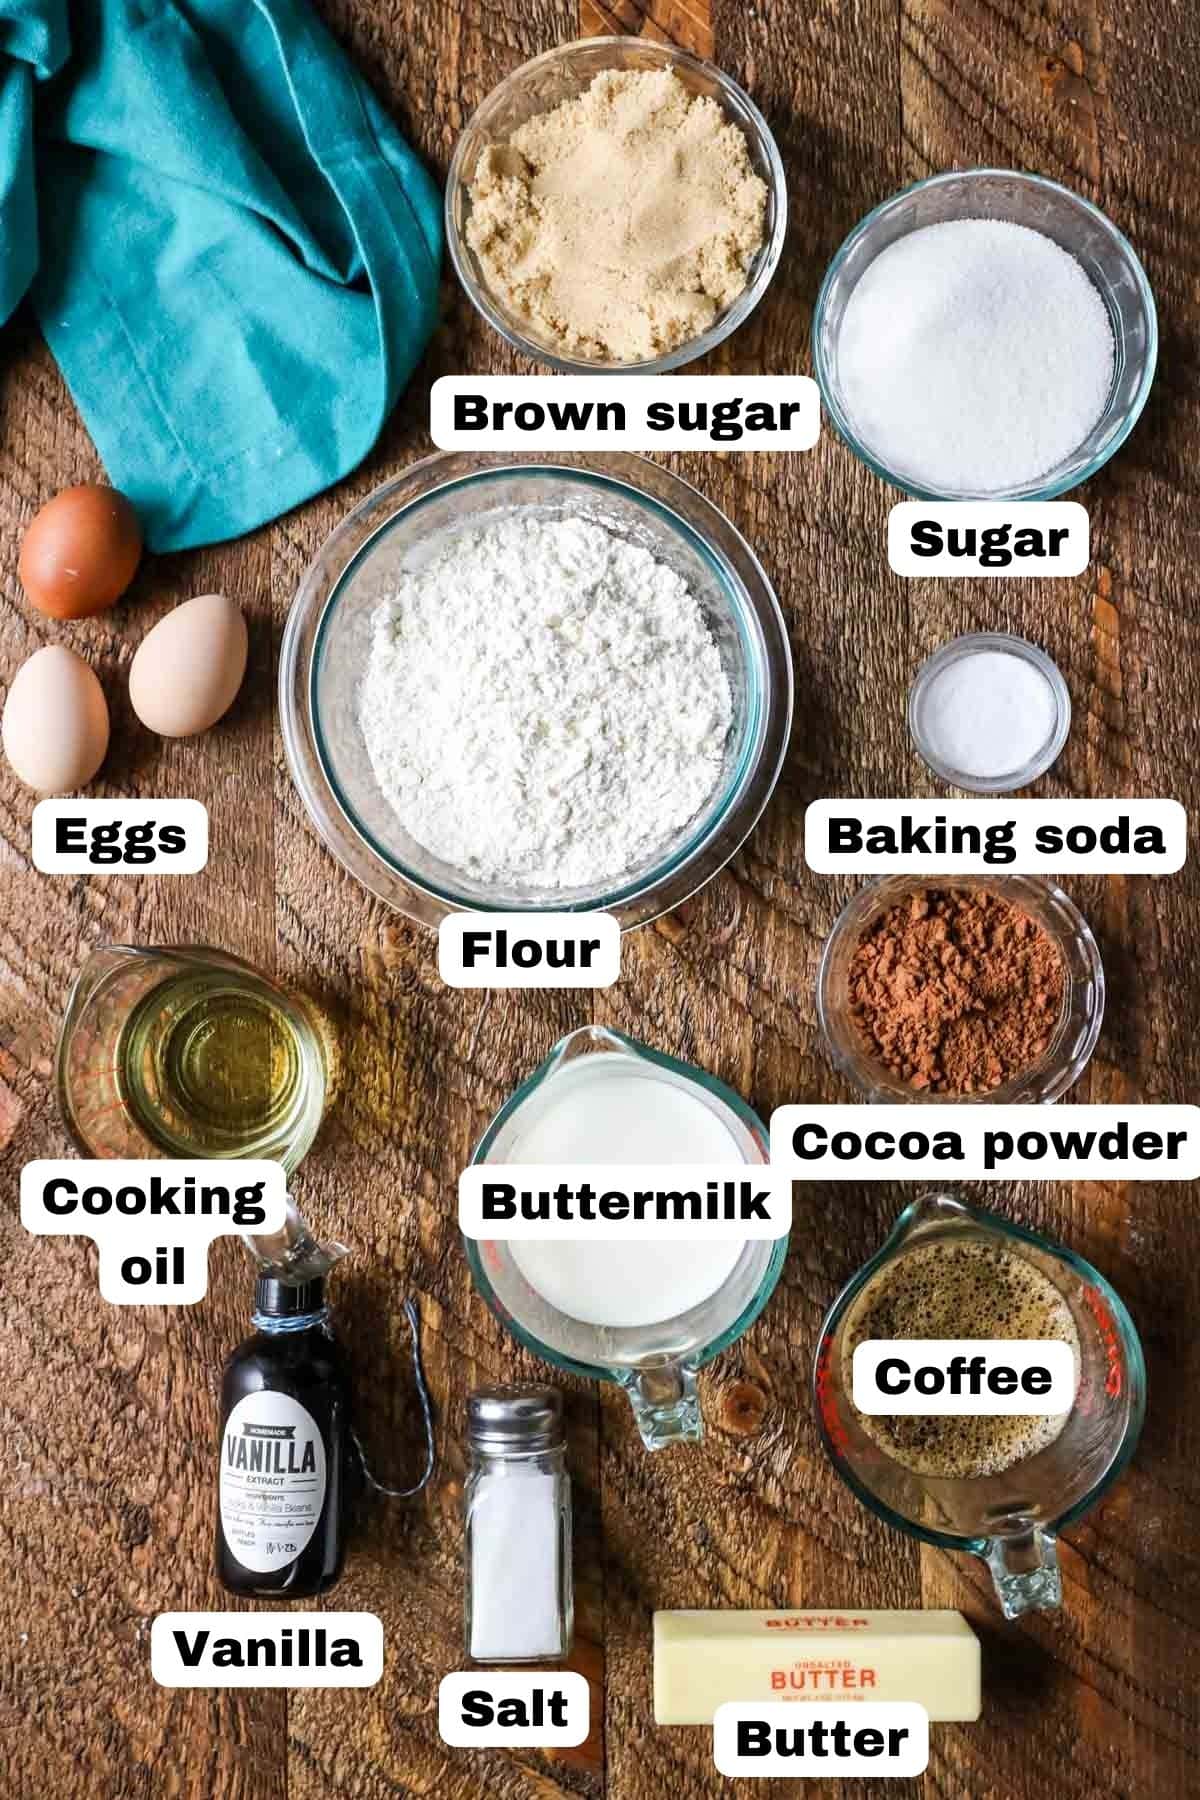 Overhead view of labelled ingredients including cocoa powder, buttermilk, coffee, and more.